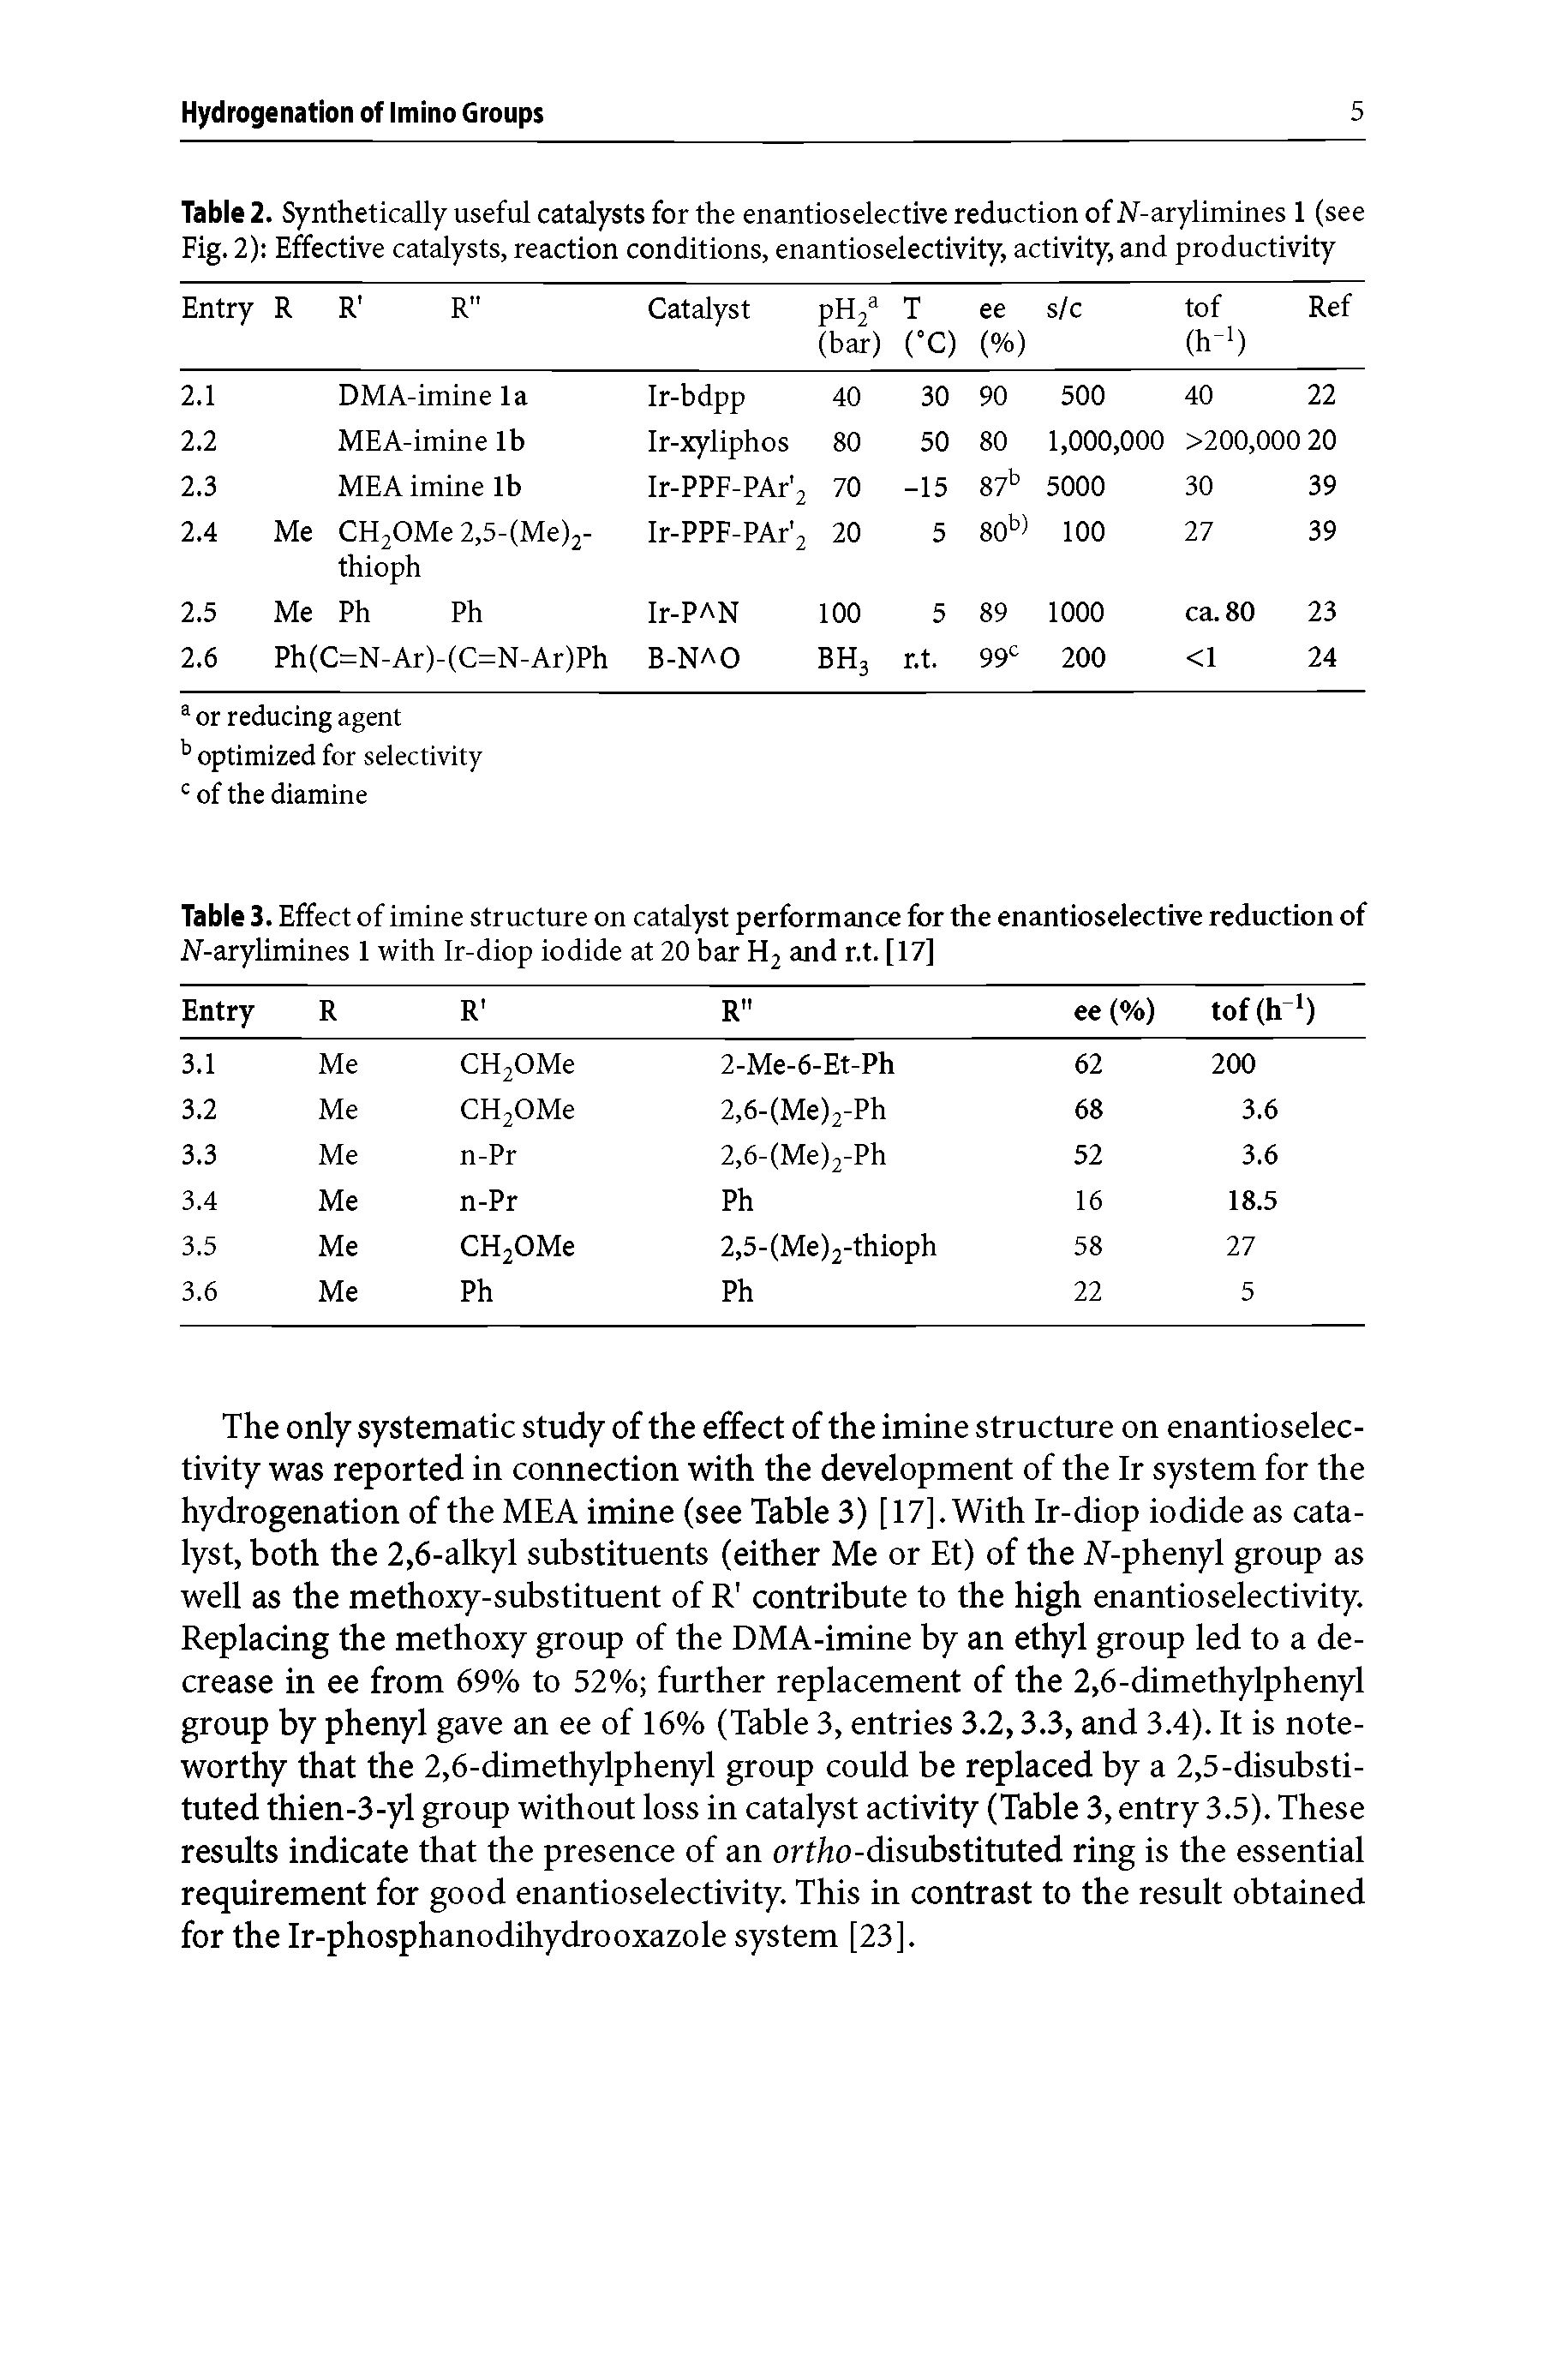 Table 3. Effect of imine structure on catalyst performance for the enantioselective reduction of JV-arylimines 1 with Ir-diop iodide at 20 bar H2 and r.t. [17]...